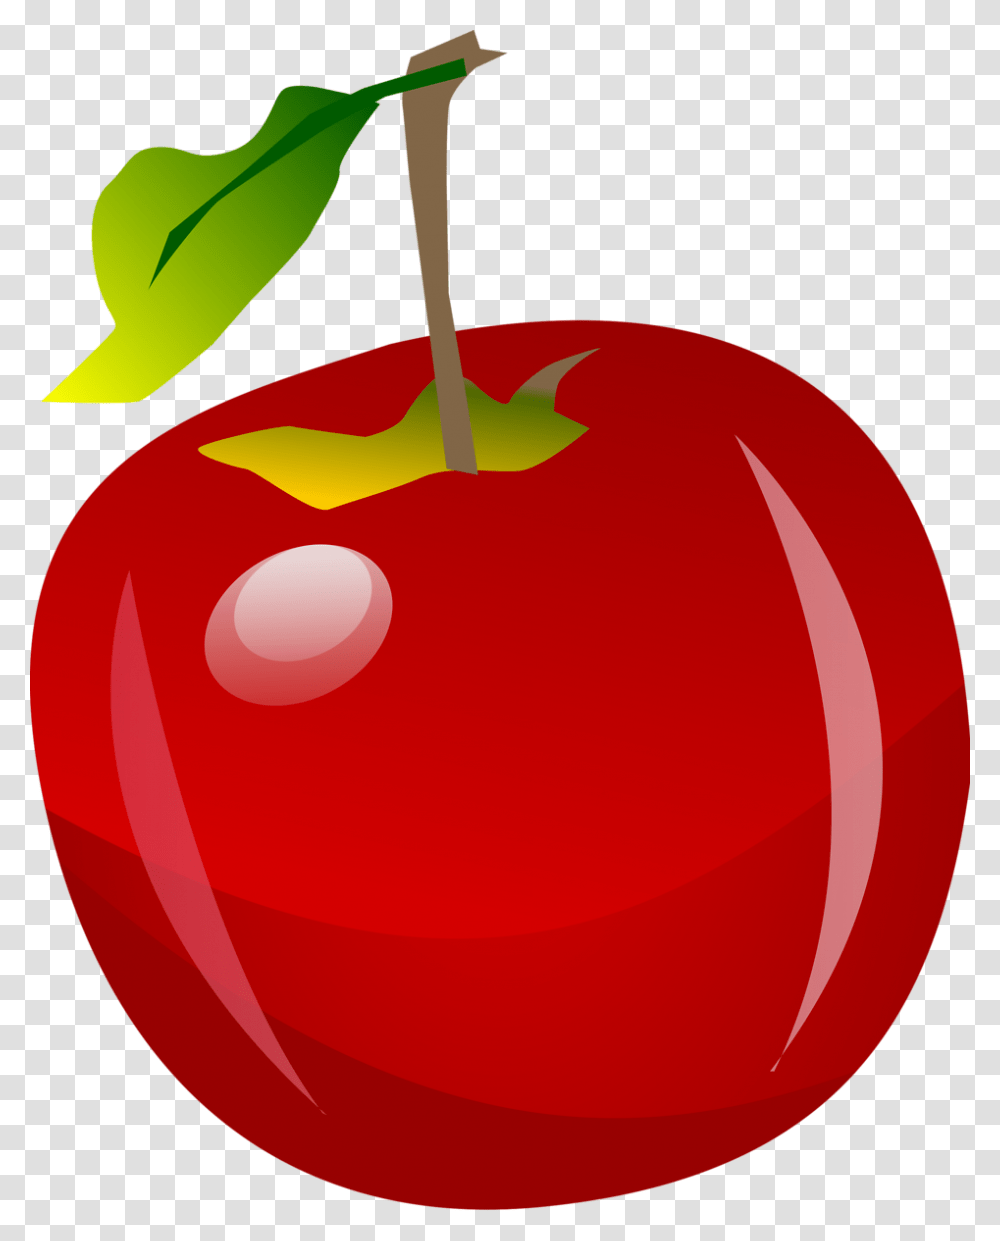 Apple Fruit Nature Free Vector Graphic On Pixabay Background Apple, Plant, Food, Cherry Transparent Png